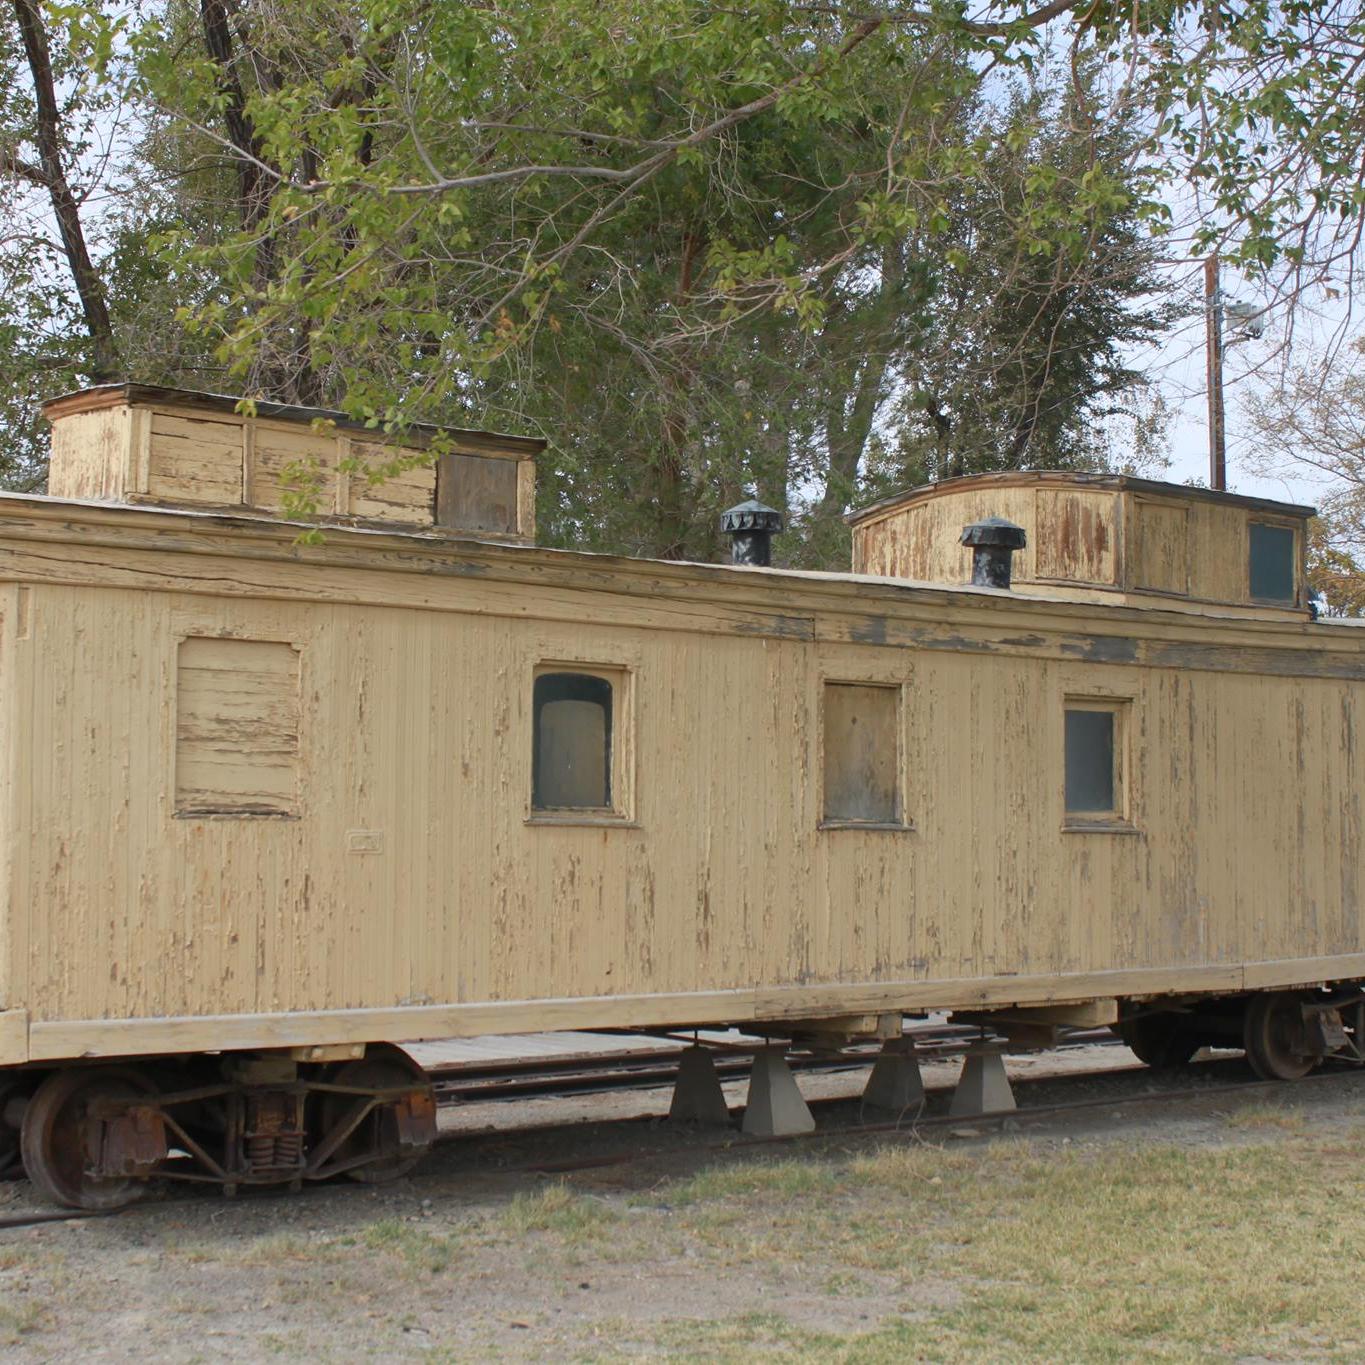 Caboose #1 at Laws, October 2014.